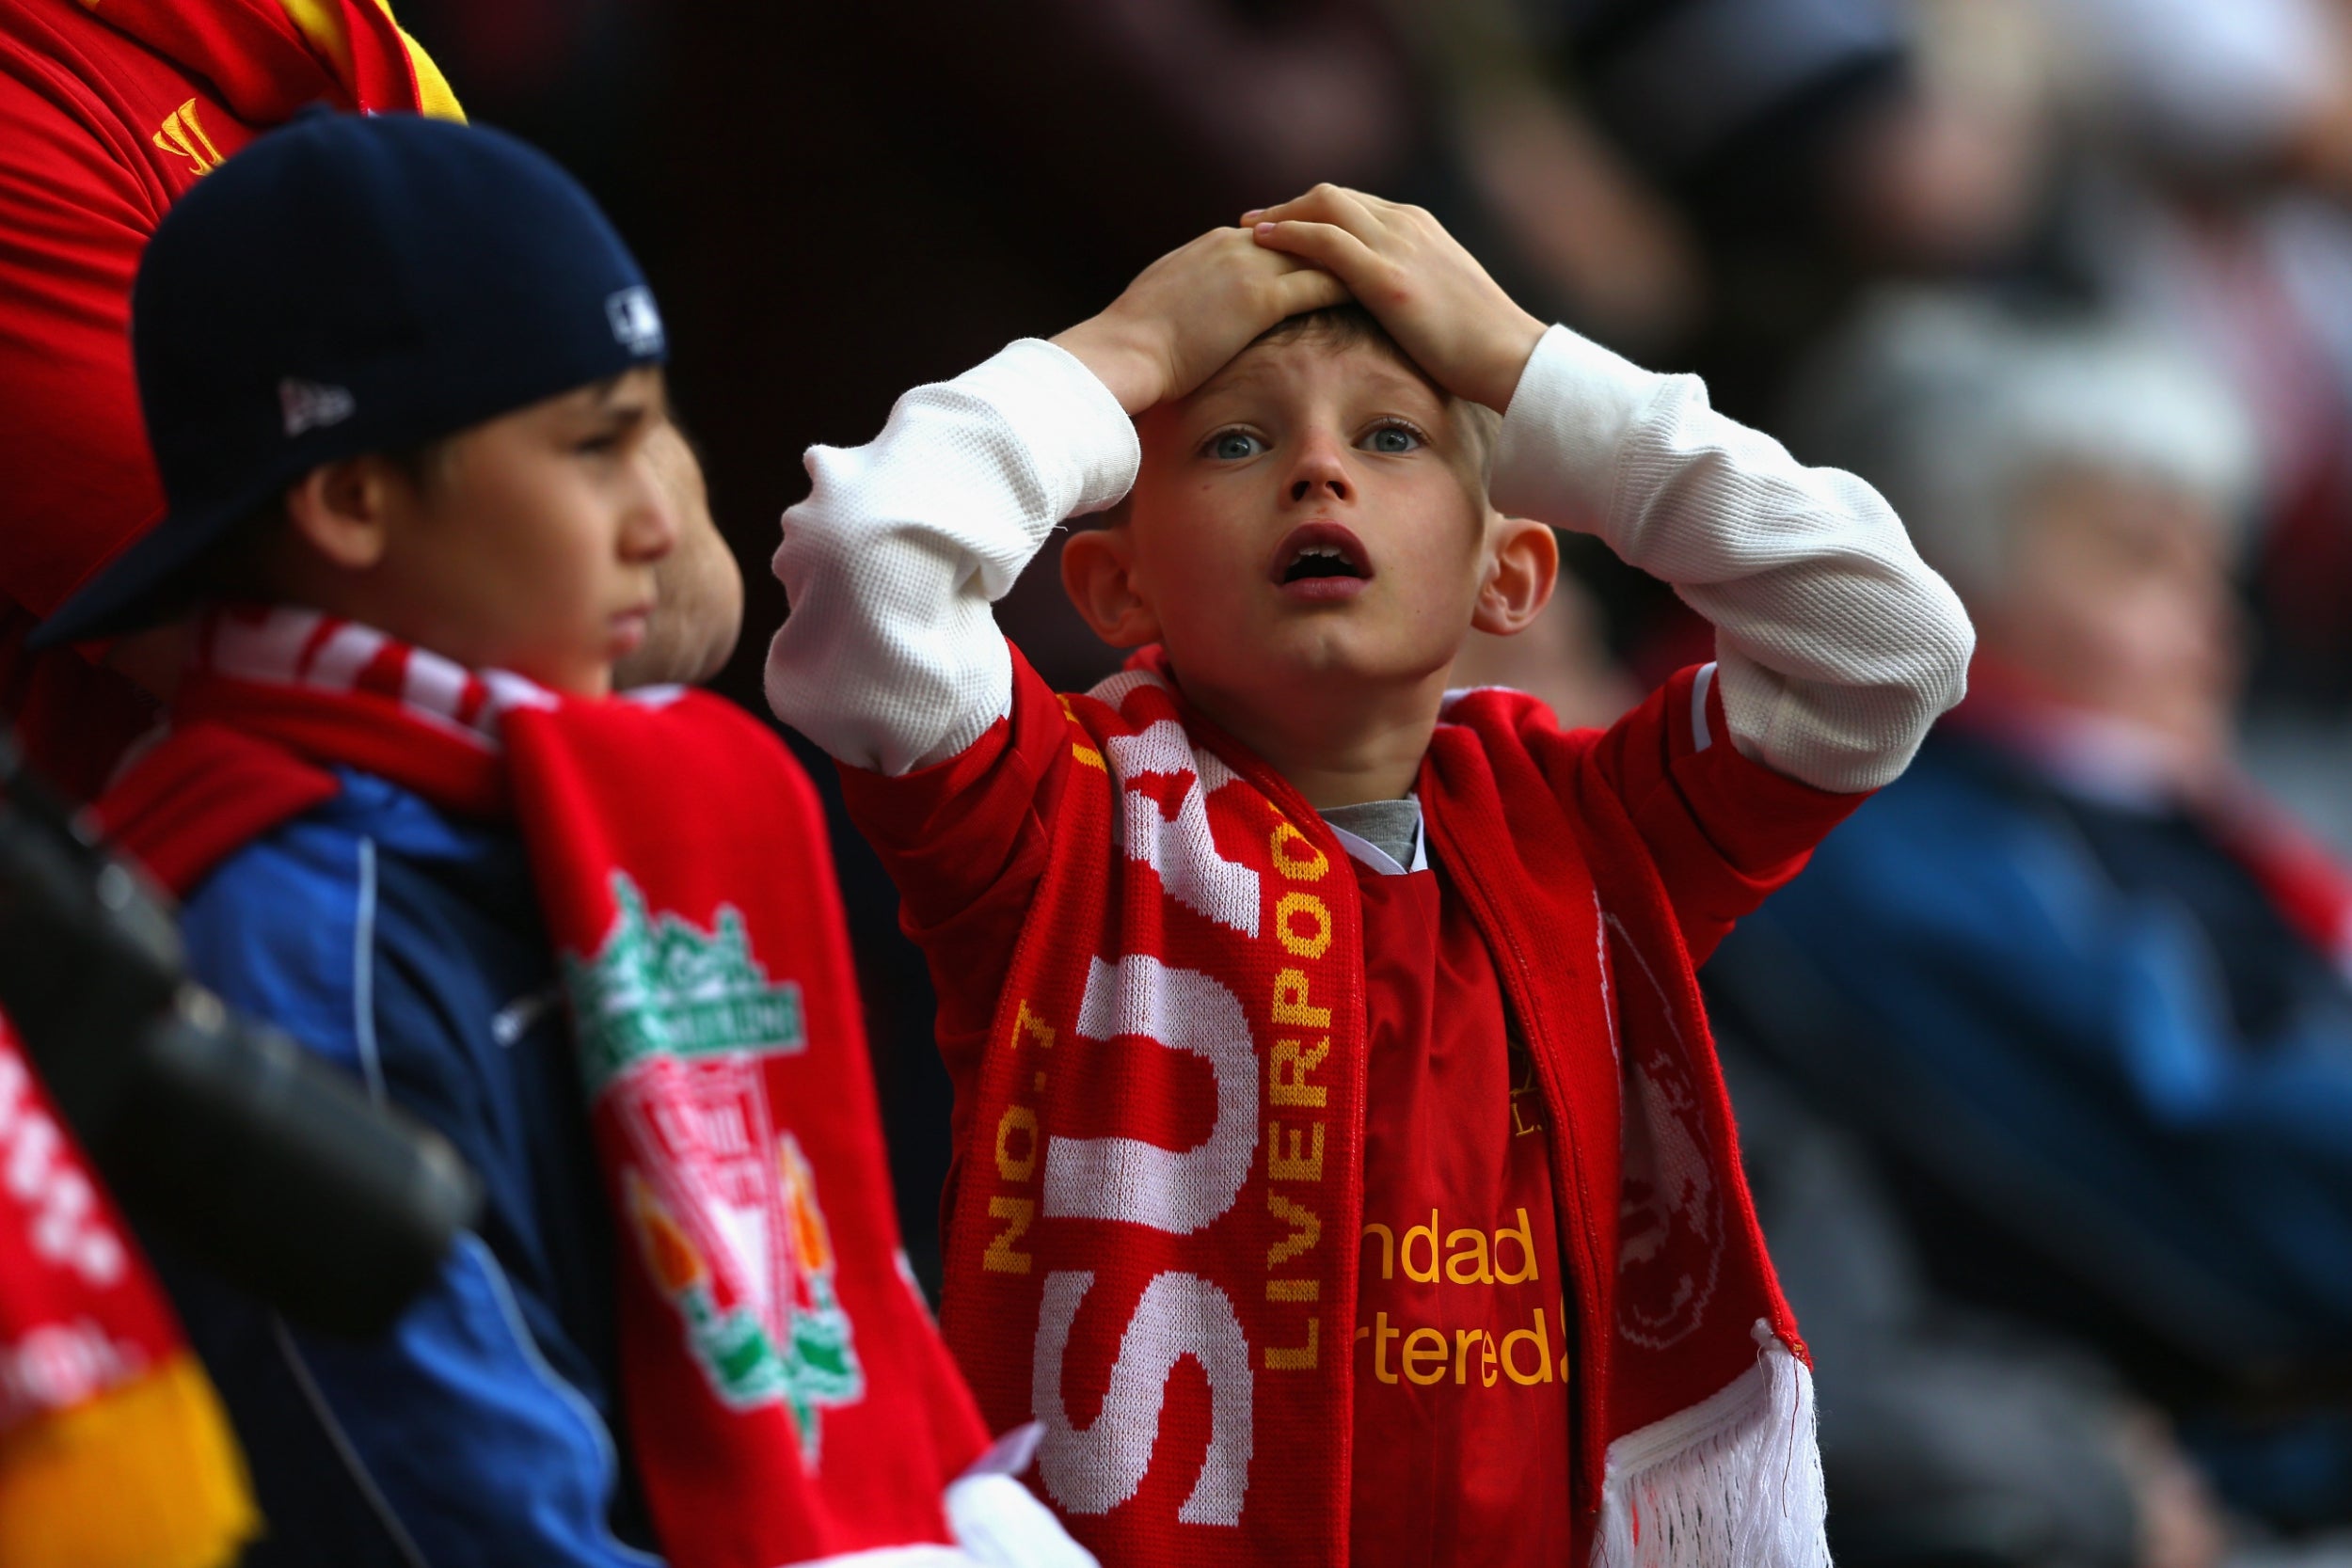 Reds fans couldn't believe what unfolded (Getty Images)